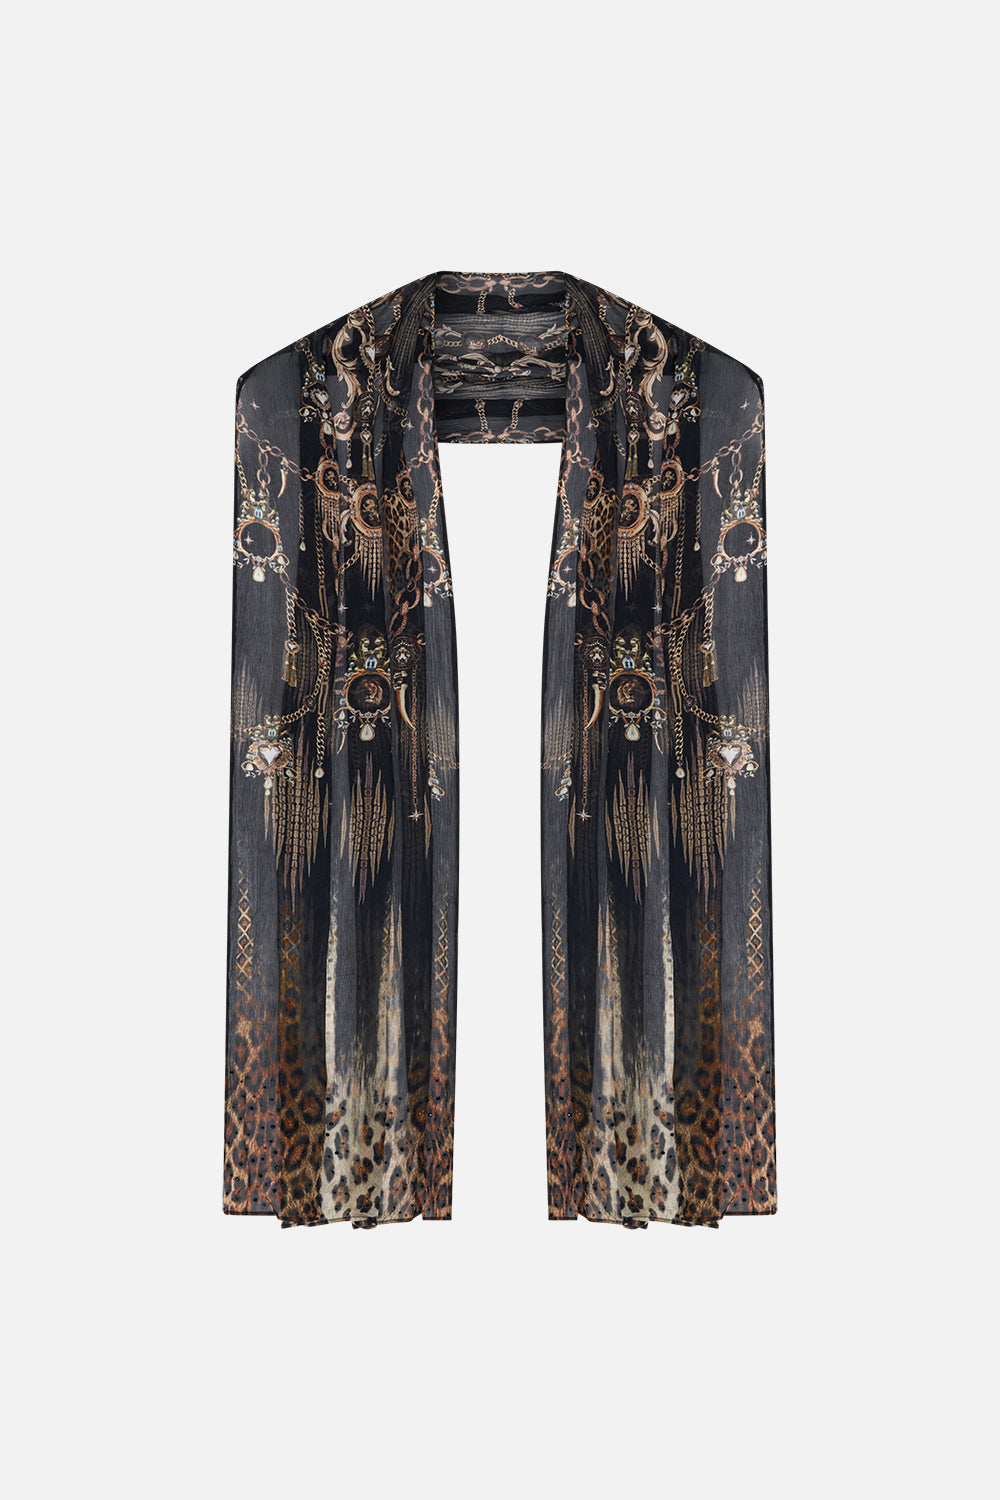 Product view of CAMILLA long silk scarf in Jungle Dreaming animal print